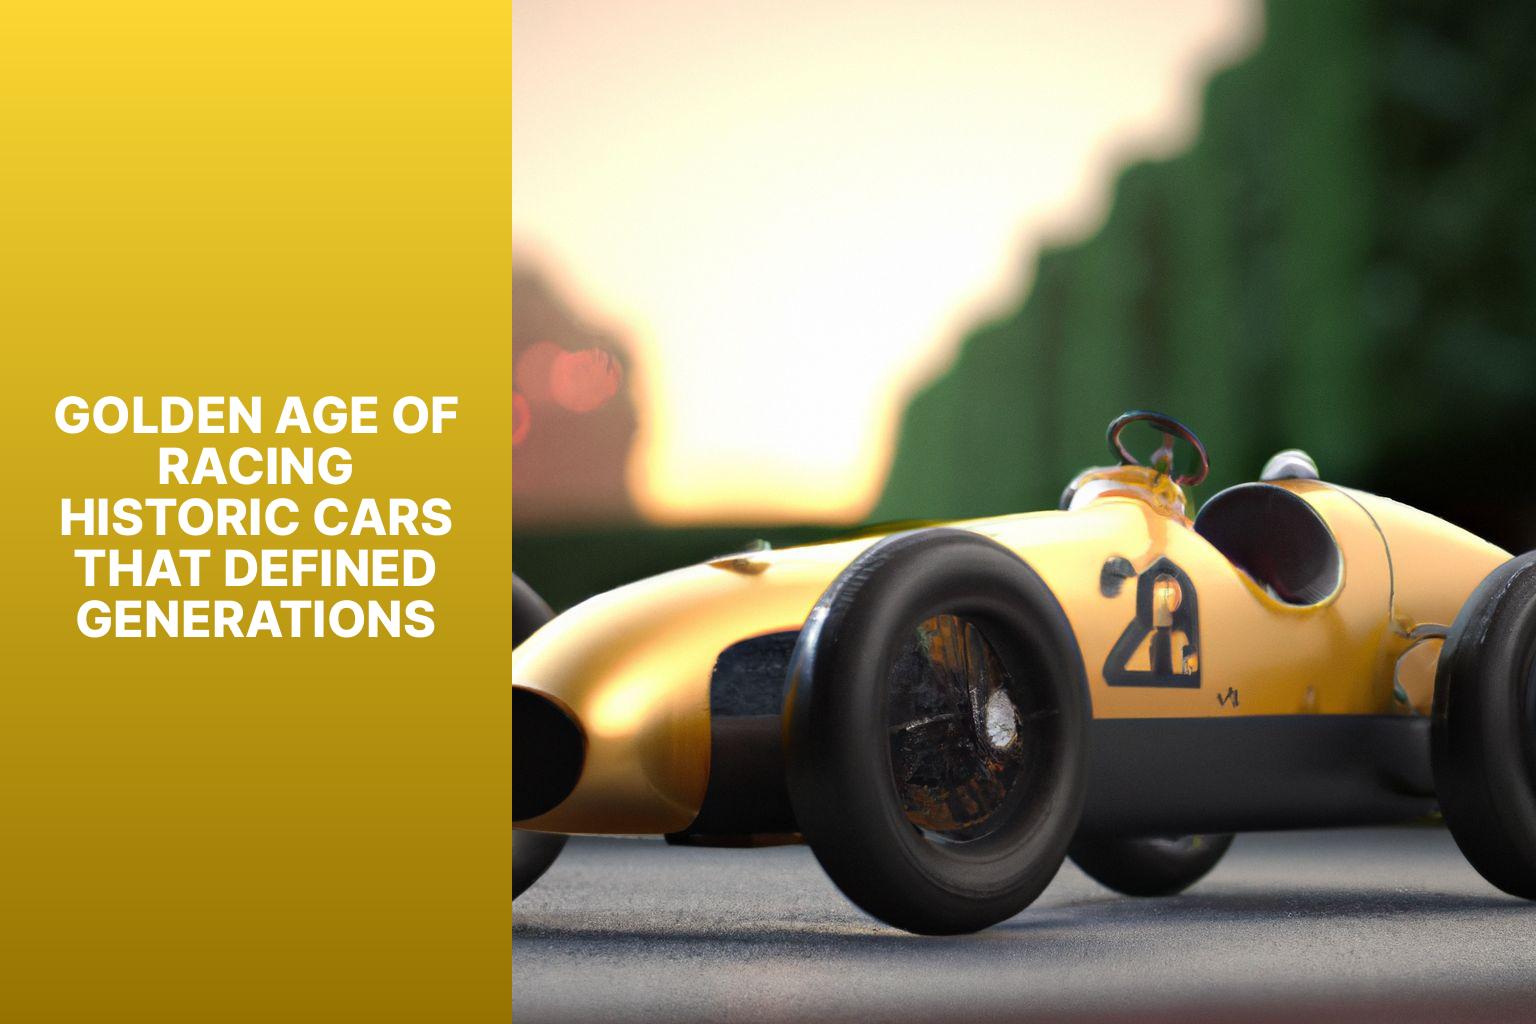 Golden Age of Racing: Historic Cars That Defined Generations